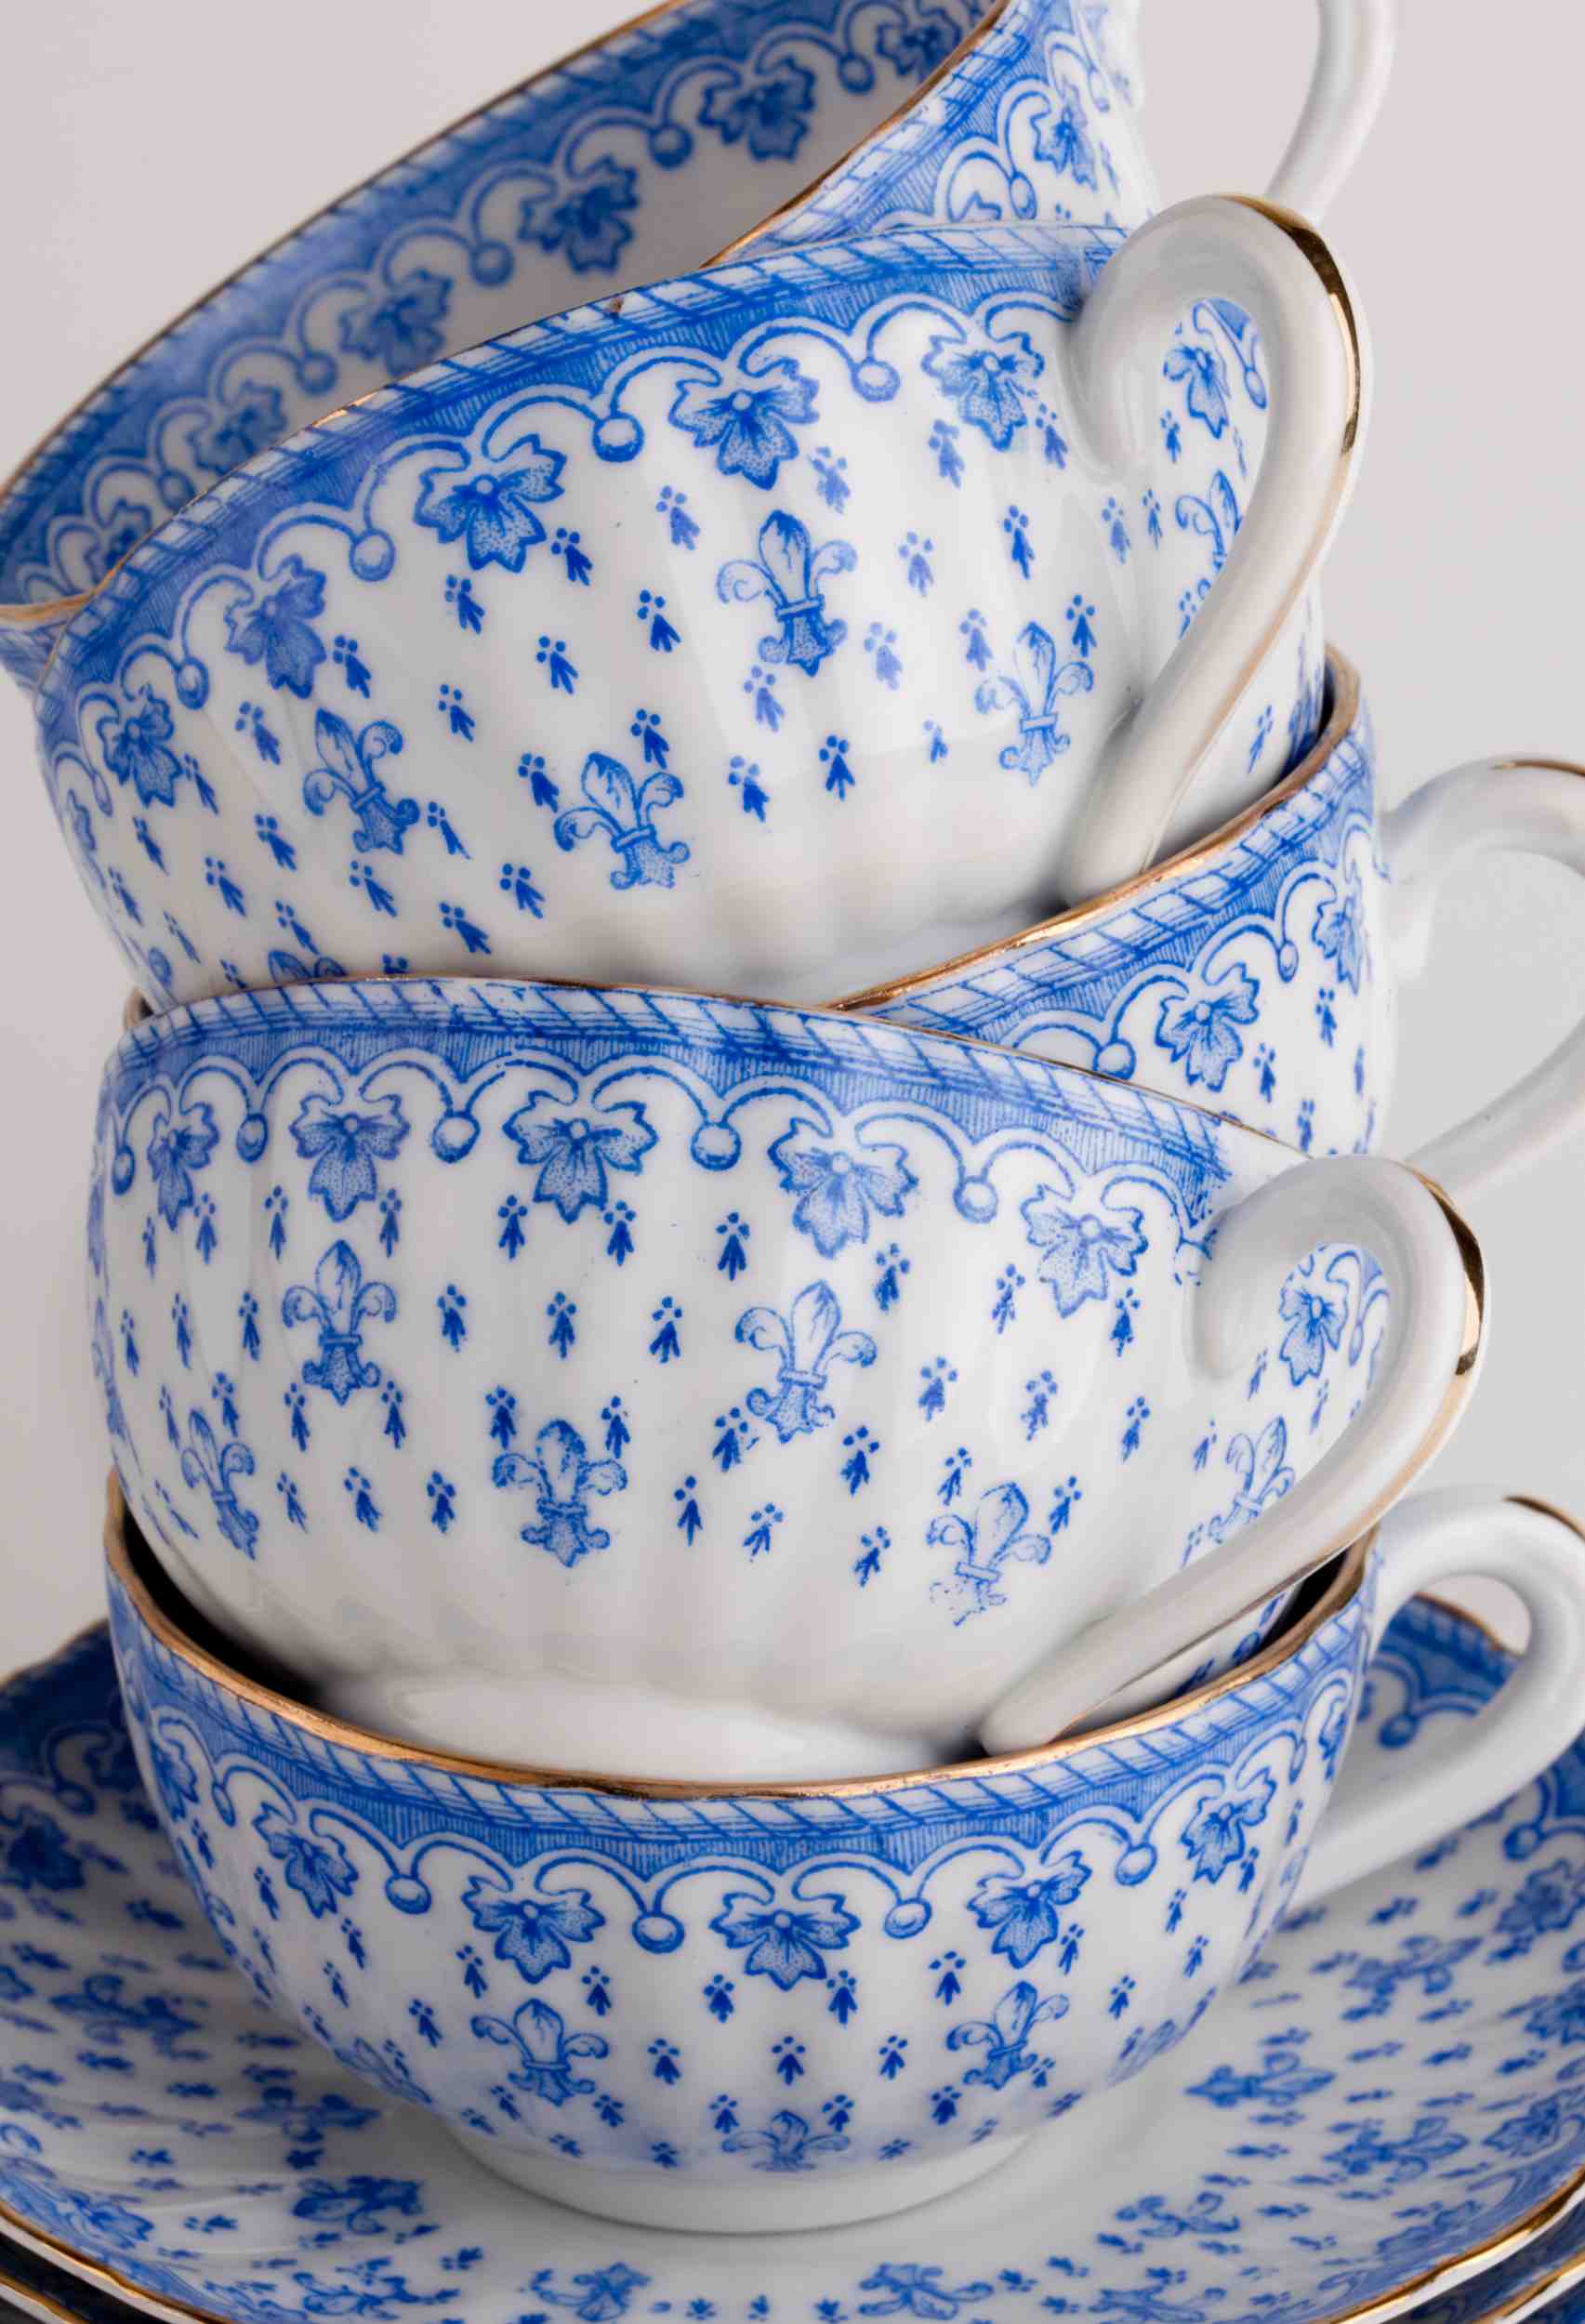 Celebrating with Porcelain The Art of Thoughtful Gifting